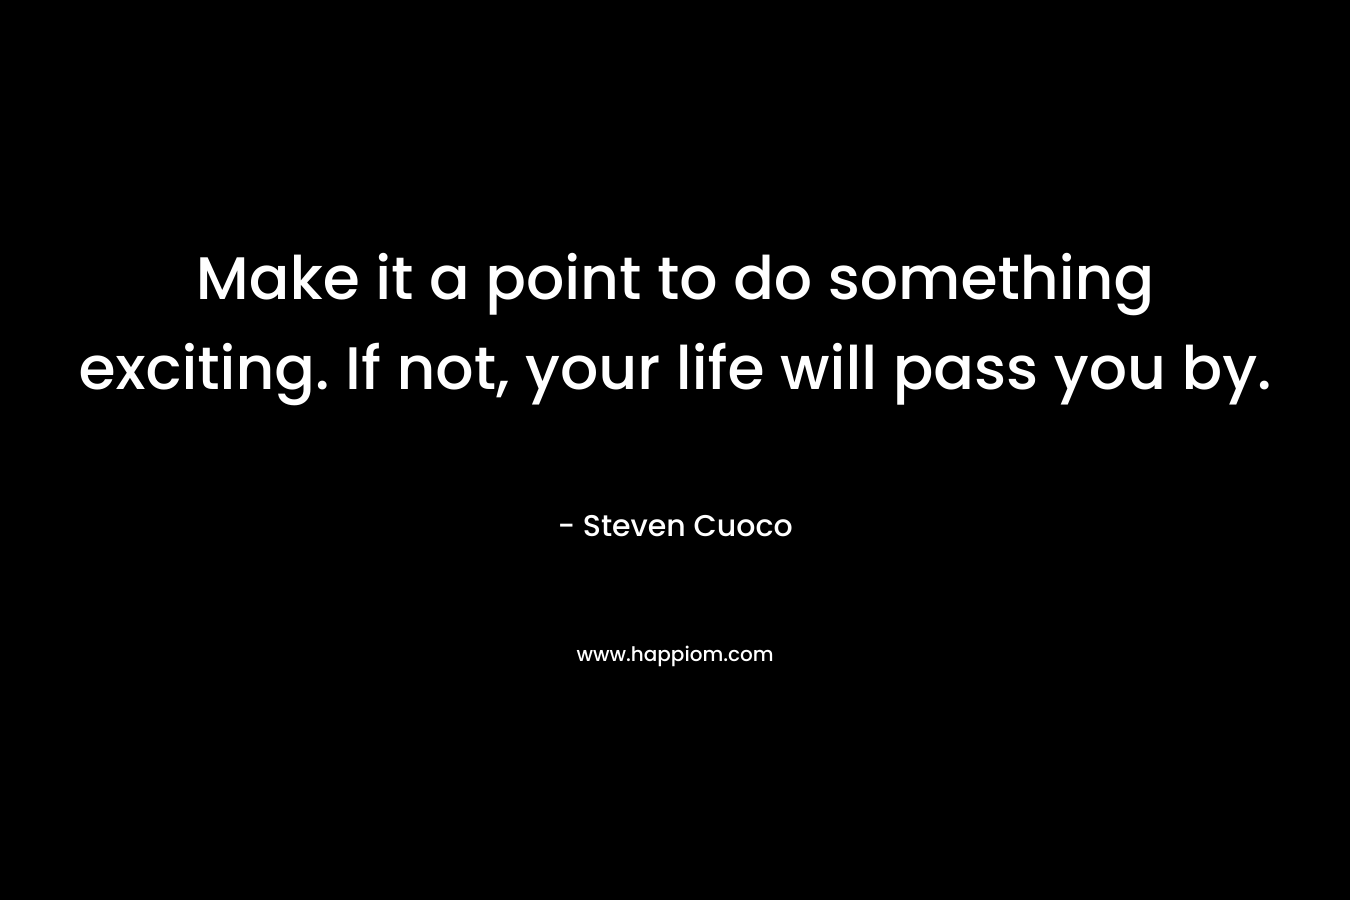 Make it a point to do something exciting. If not, your life will pass you by.